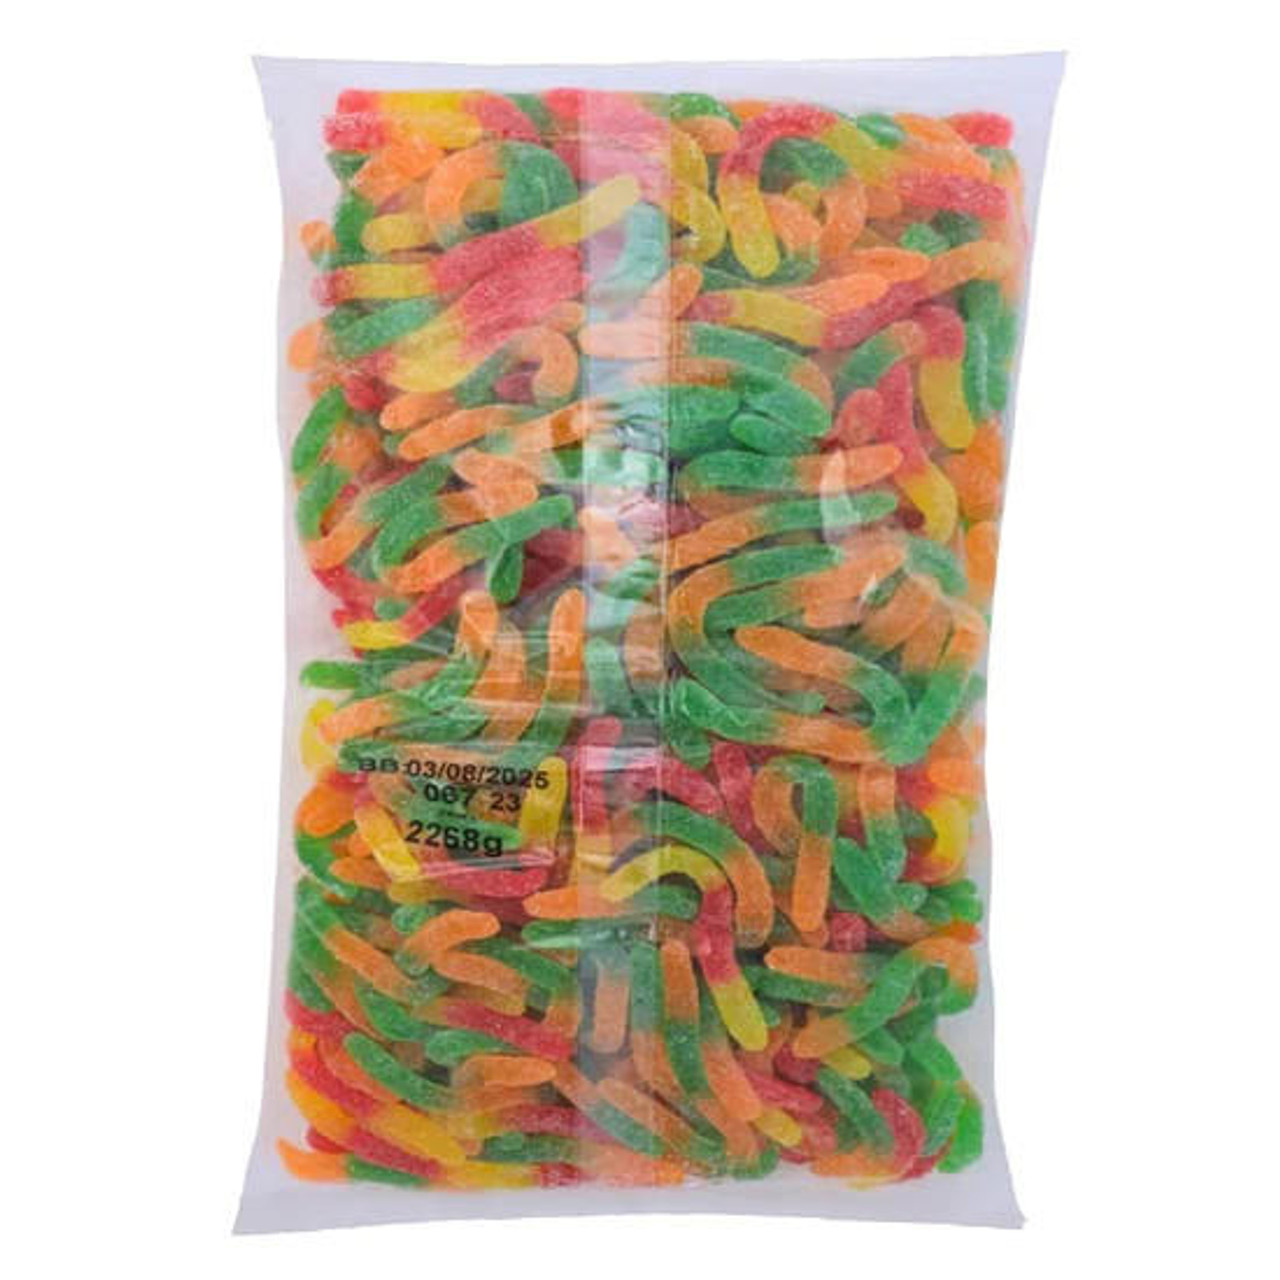  Kervan Sour Gummy Worms 5 lb. - 4/Case - Tangy Dessert Topping 